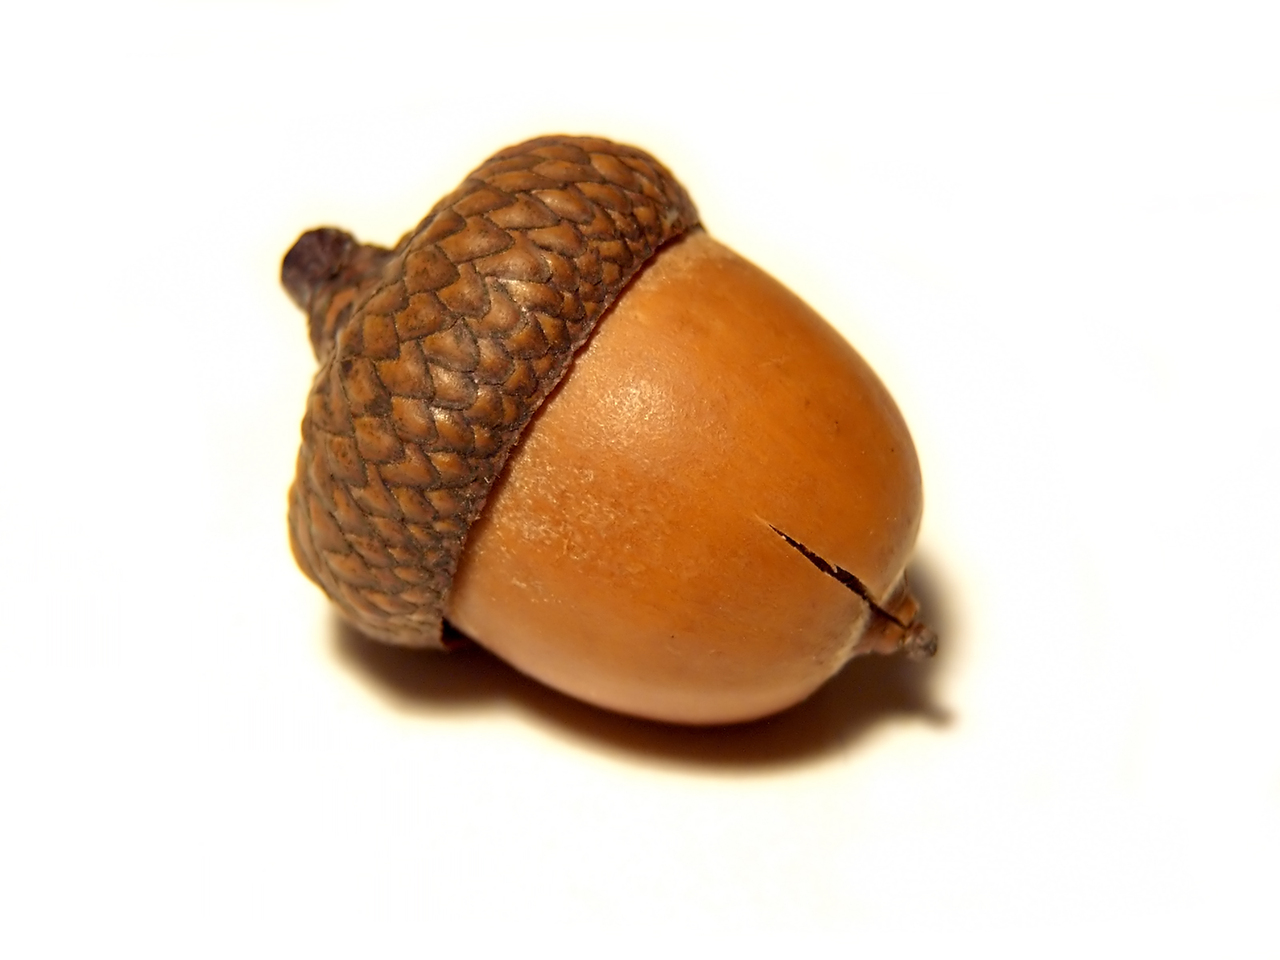 Photograph of a cracked acorn. Accompanying FROM HUMBLE ORIGINS' FHOLOGUE blog post "YOUR UNIQUELY INDIVIDUAL PERSONAL LEGACY". Image copyright www.freeimages.com / Emma McCreary.